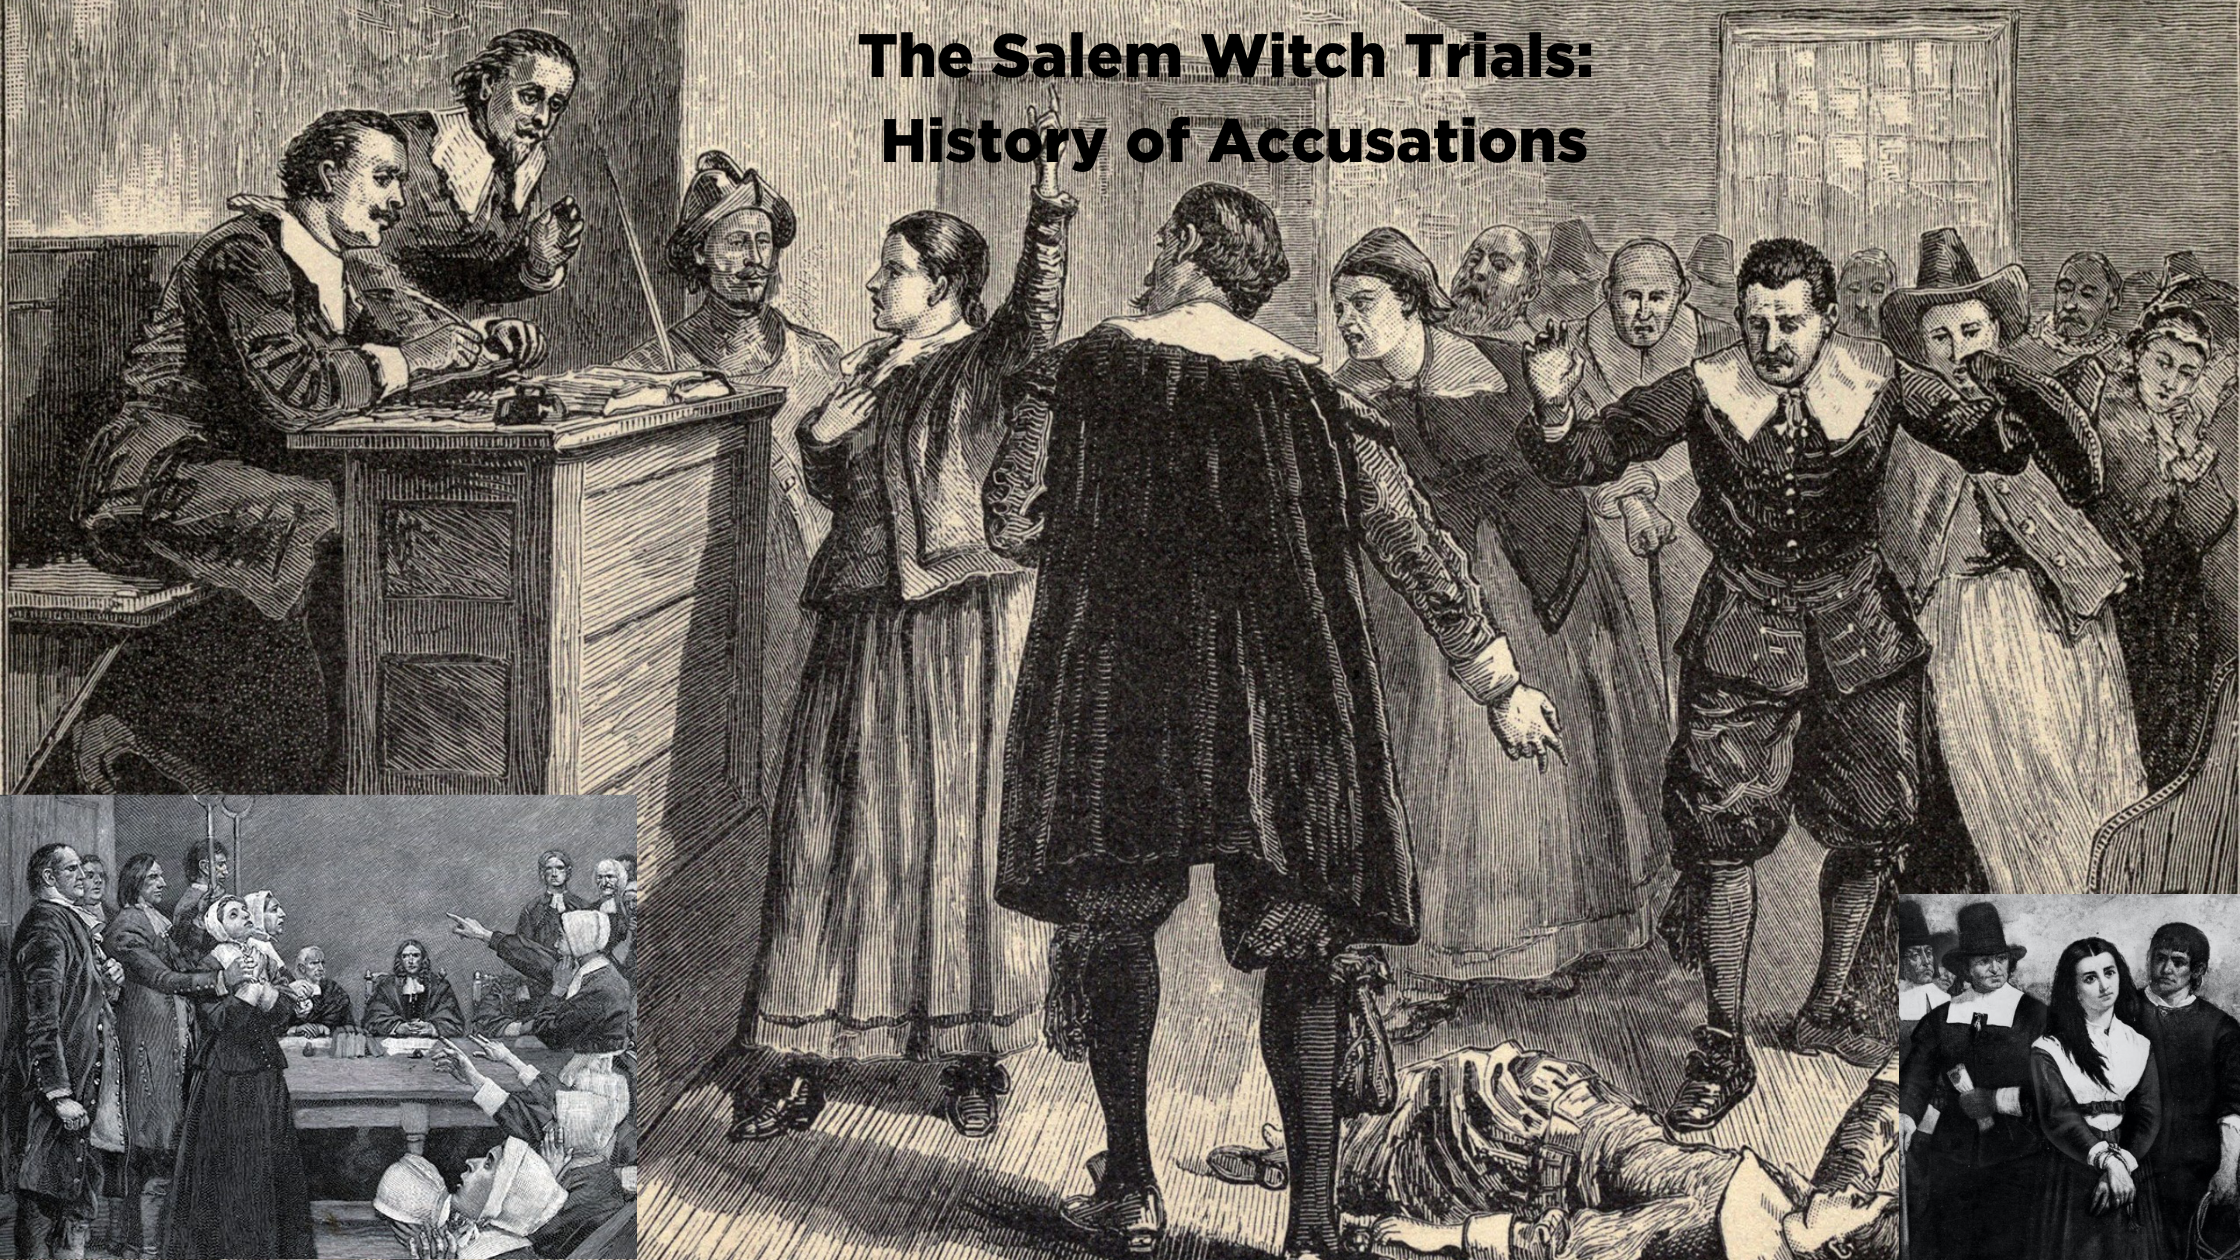 The Salem Witch Trials: History of Accusations